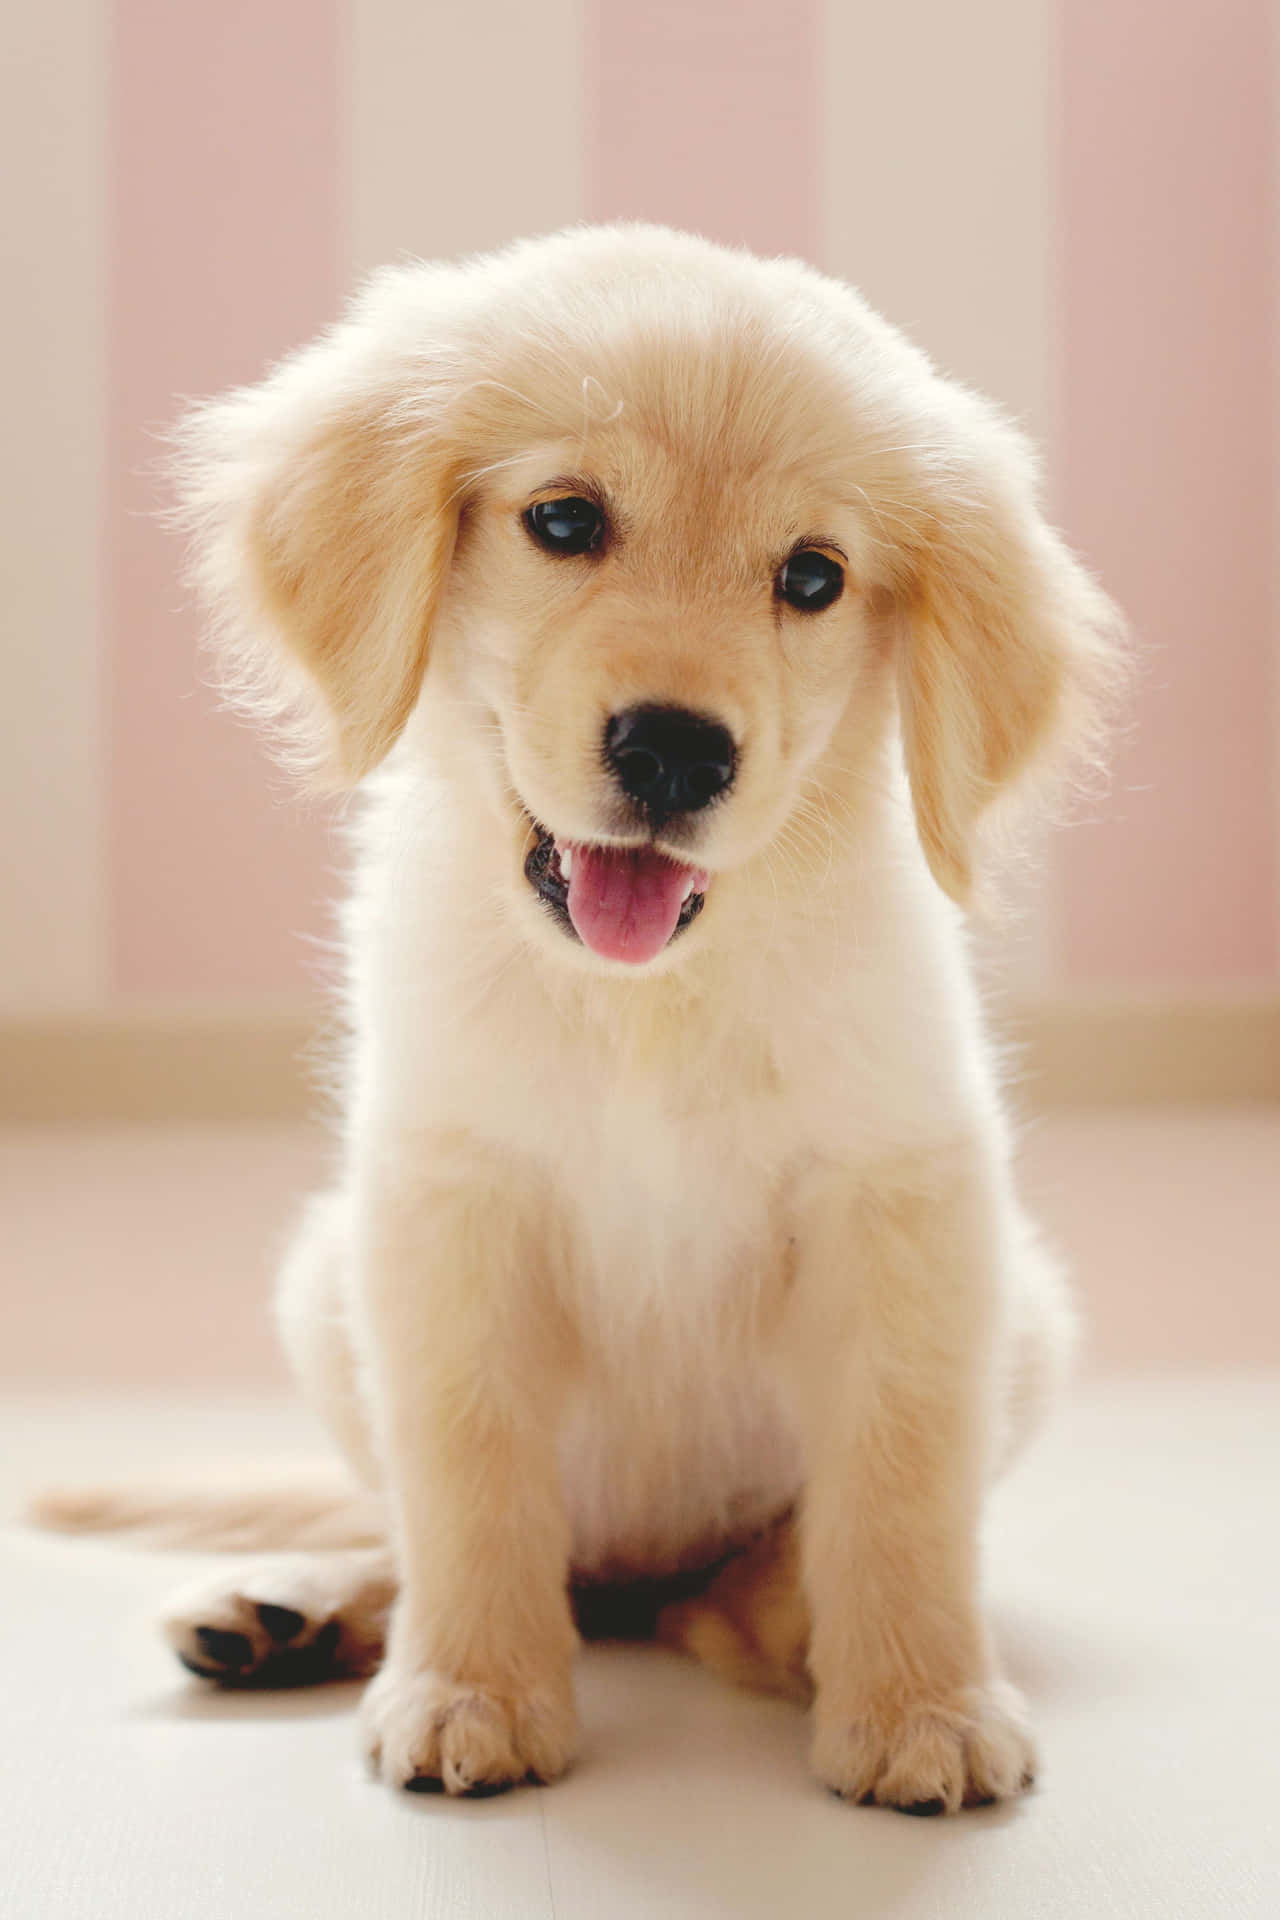 0+] Cute Little Puppies Pictures | Wallpapers.com